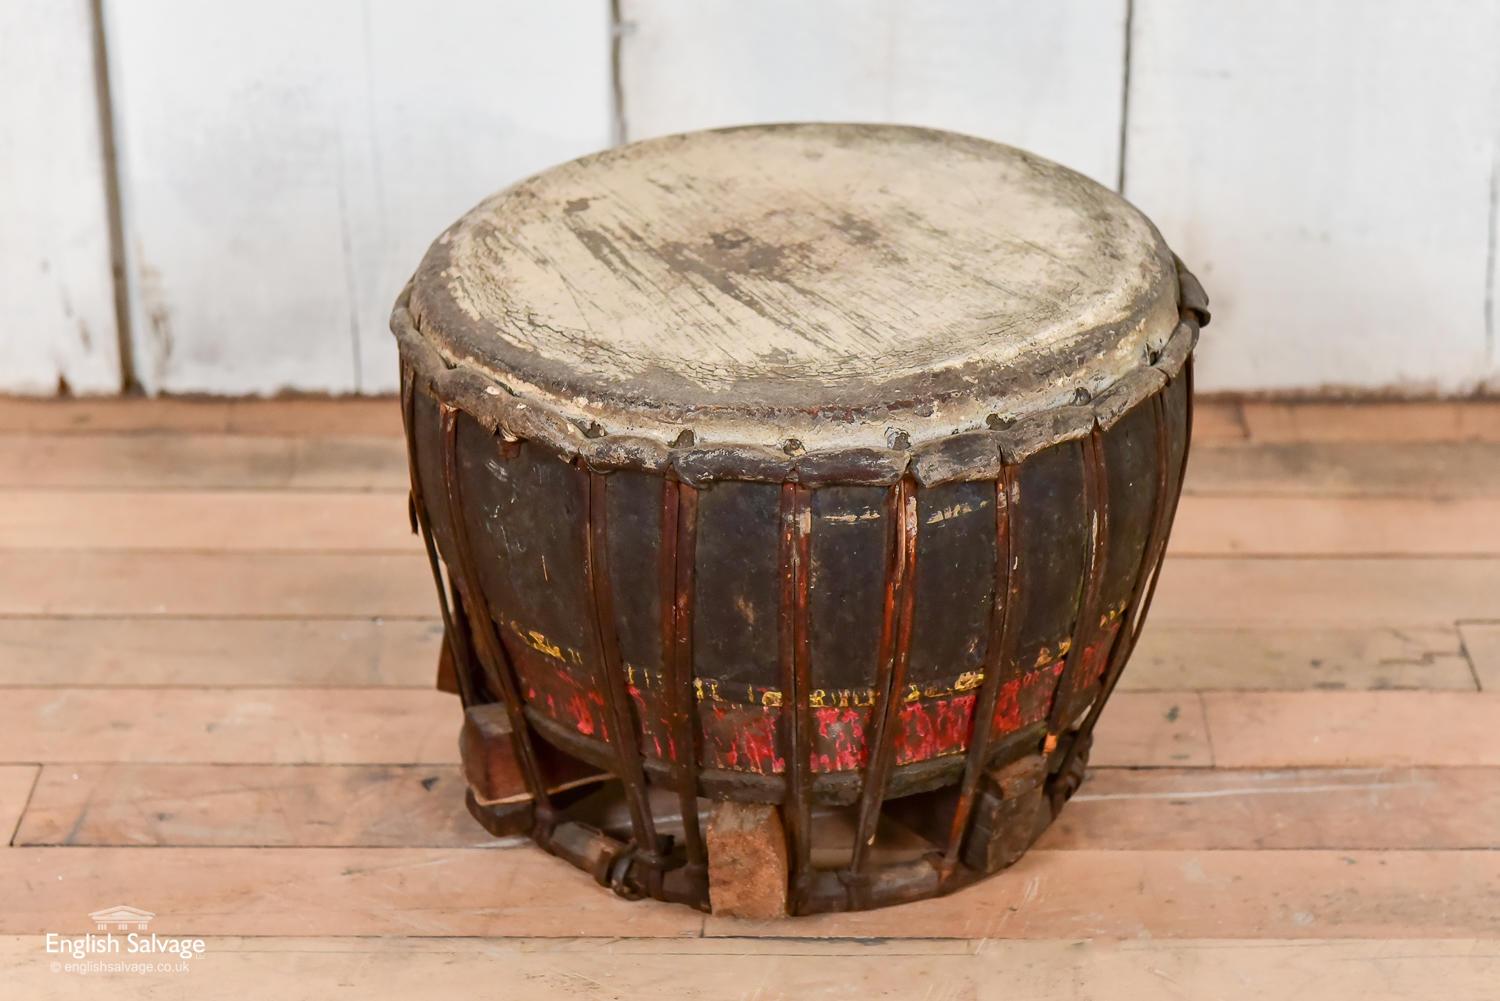 Old drum made of wood and parchment or skin [we're not sure which], with leather fastenings. It is weathered and scratched but has a lovely sound.